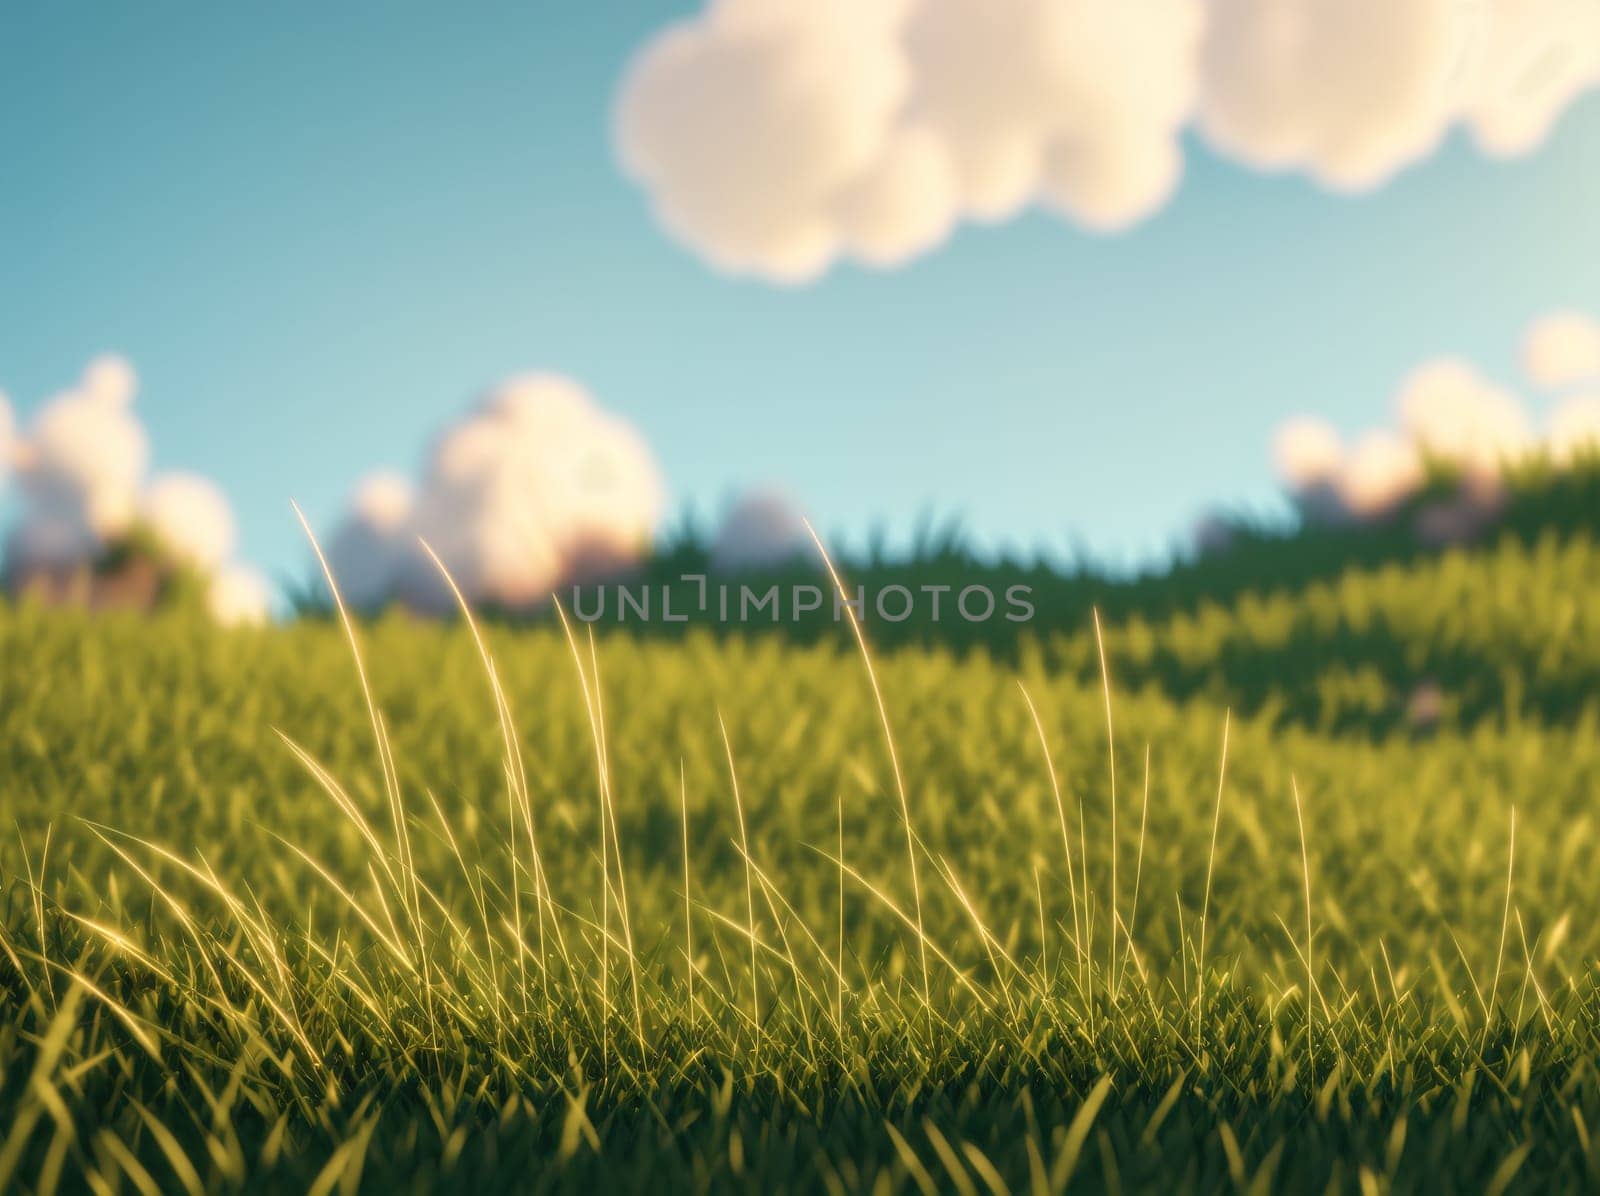 The image shows a green field with clouds in the background.